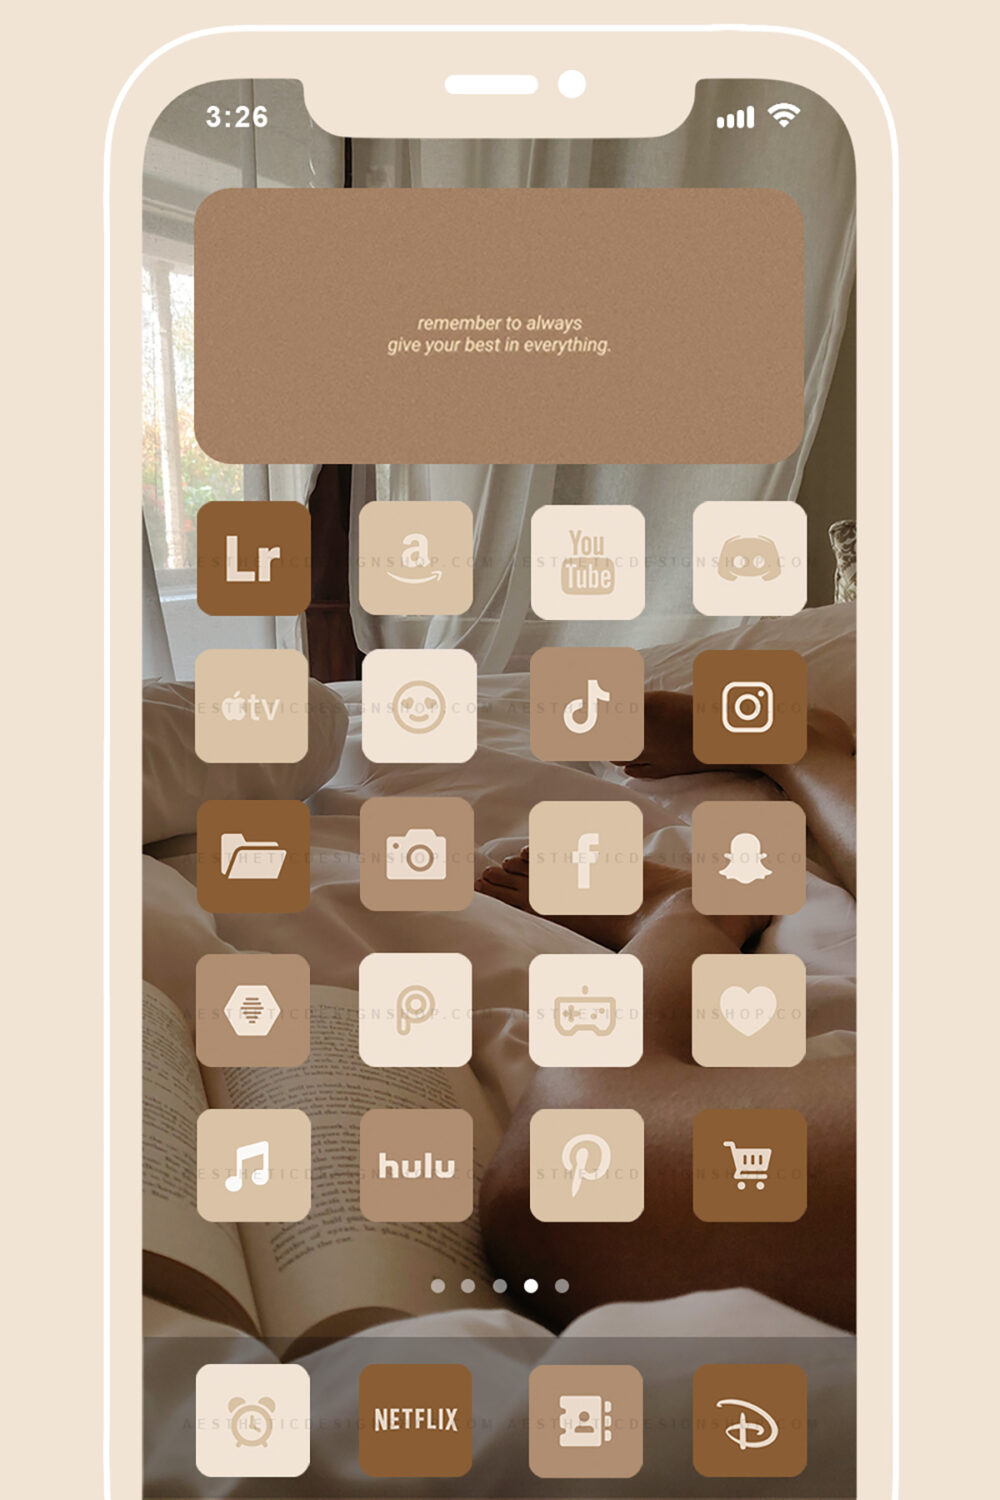 180 Brown aesthetic home screen app icons ⋆ The Aesthetic Shop